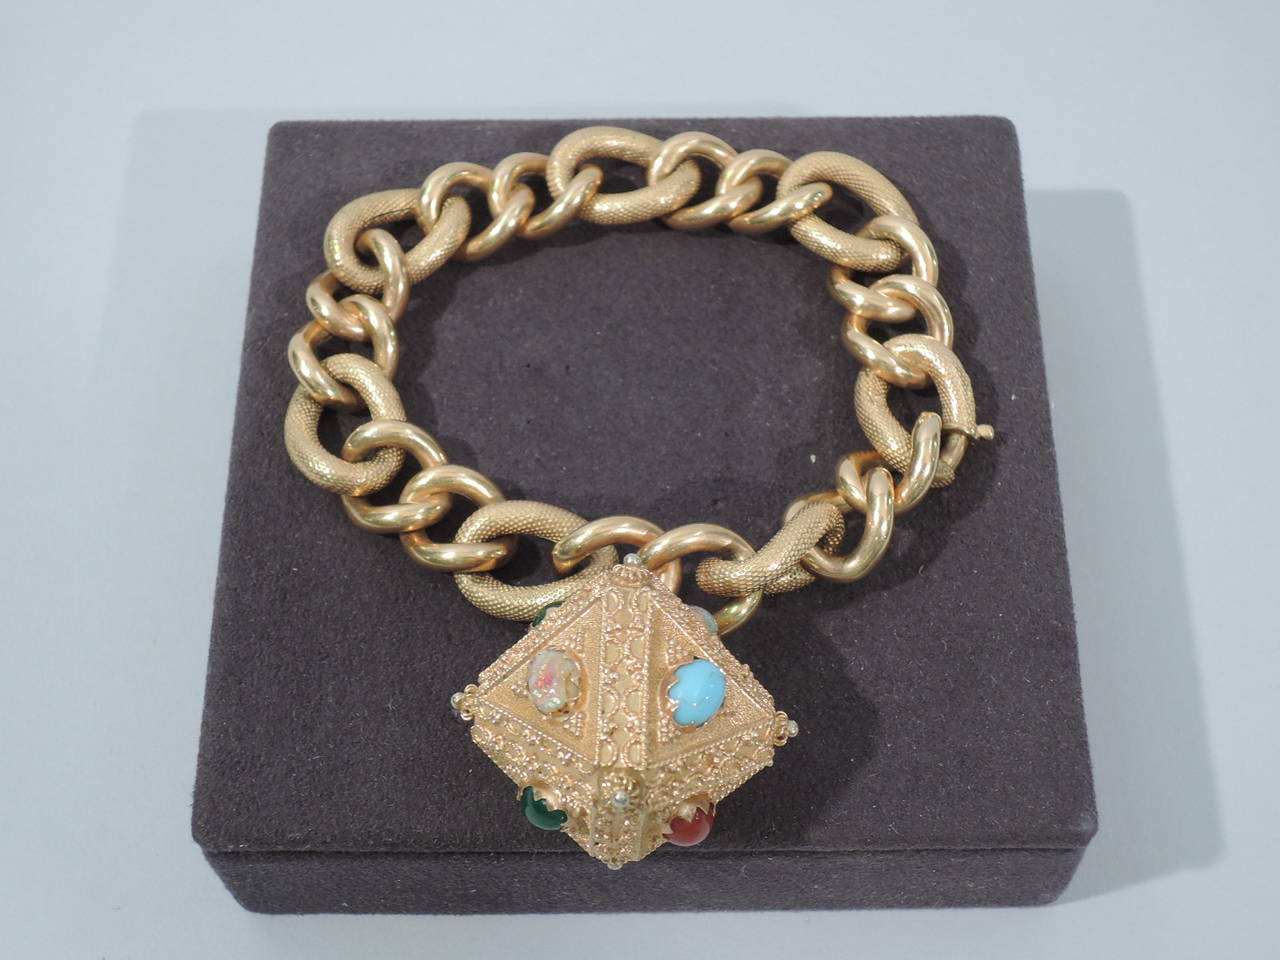 A fabulous 18K gold charm bracelet with plain circular links alternating with larger engraved oval links. “Diamond”-form charm has fine filigree beadwork and 8 semi-precious stones (turquoise, opal, cornelian, and green garnet). American, ca. 1960.